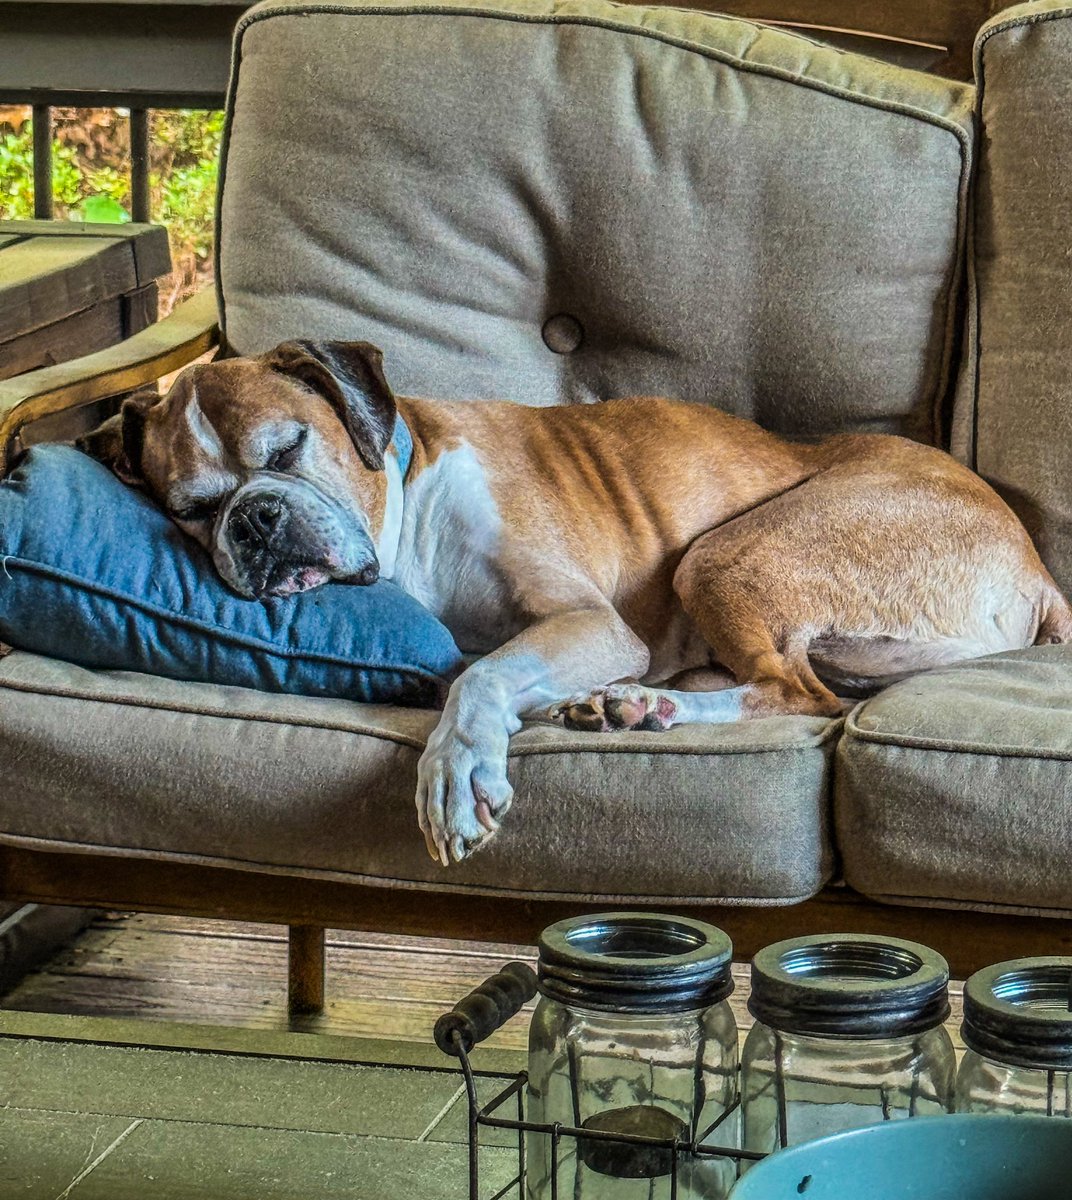 The old man looks so peaceful…#dogs #boxer #MansBestFriend #GoodBoy